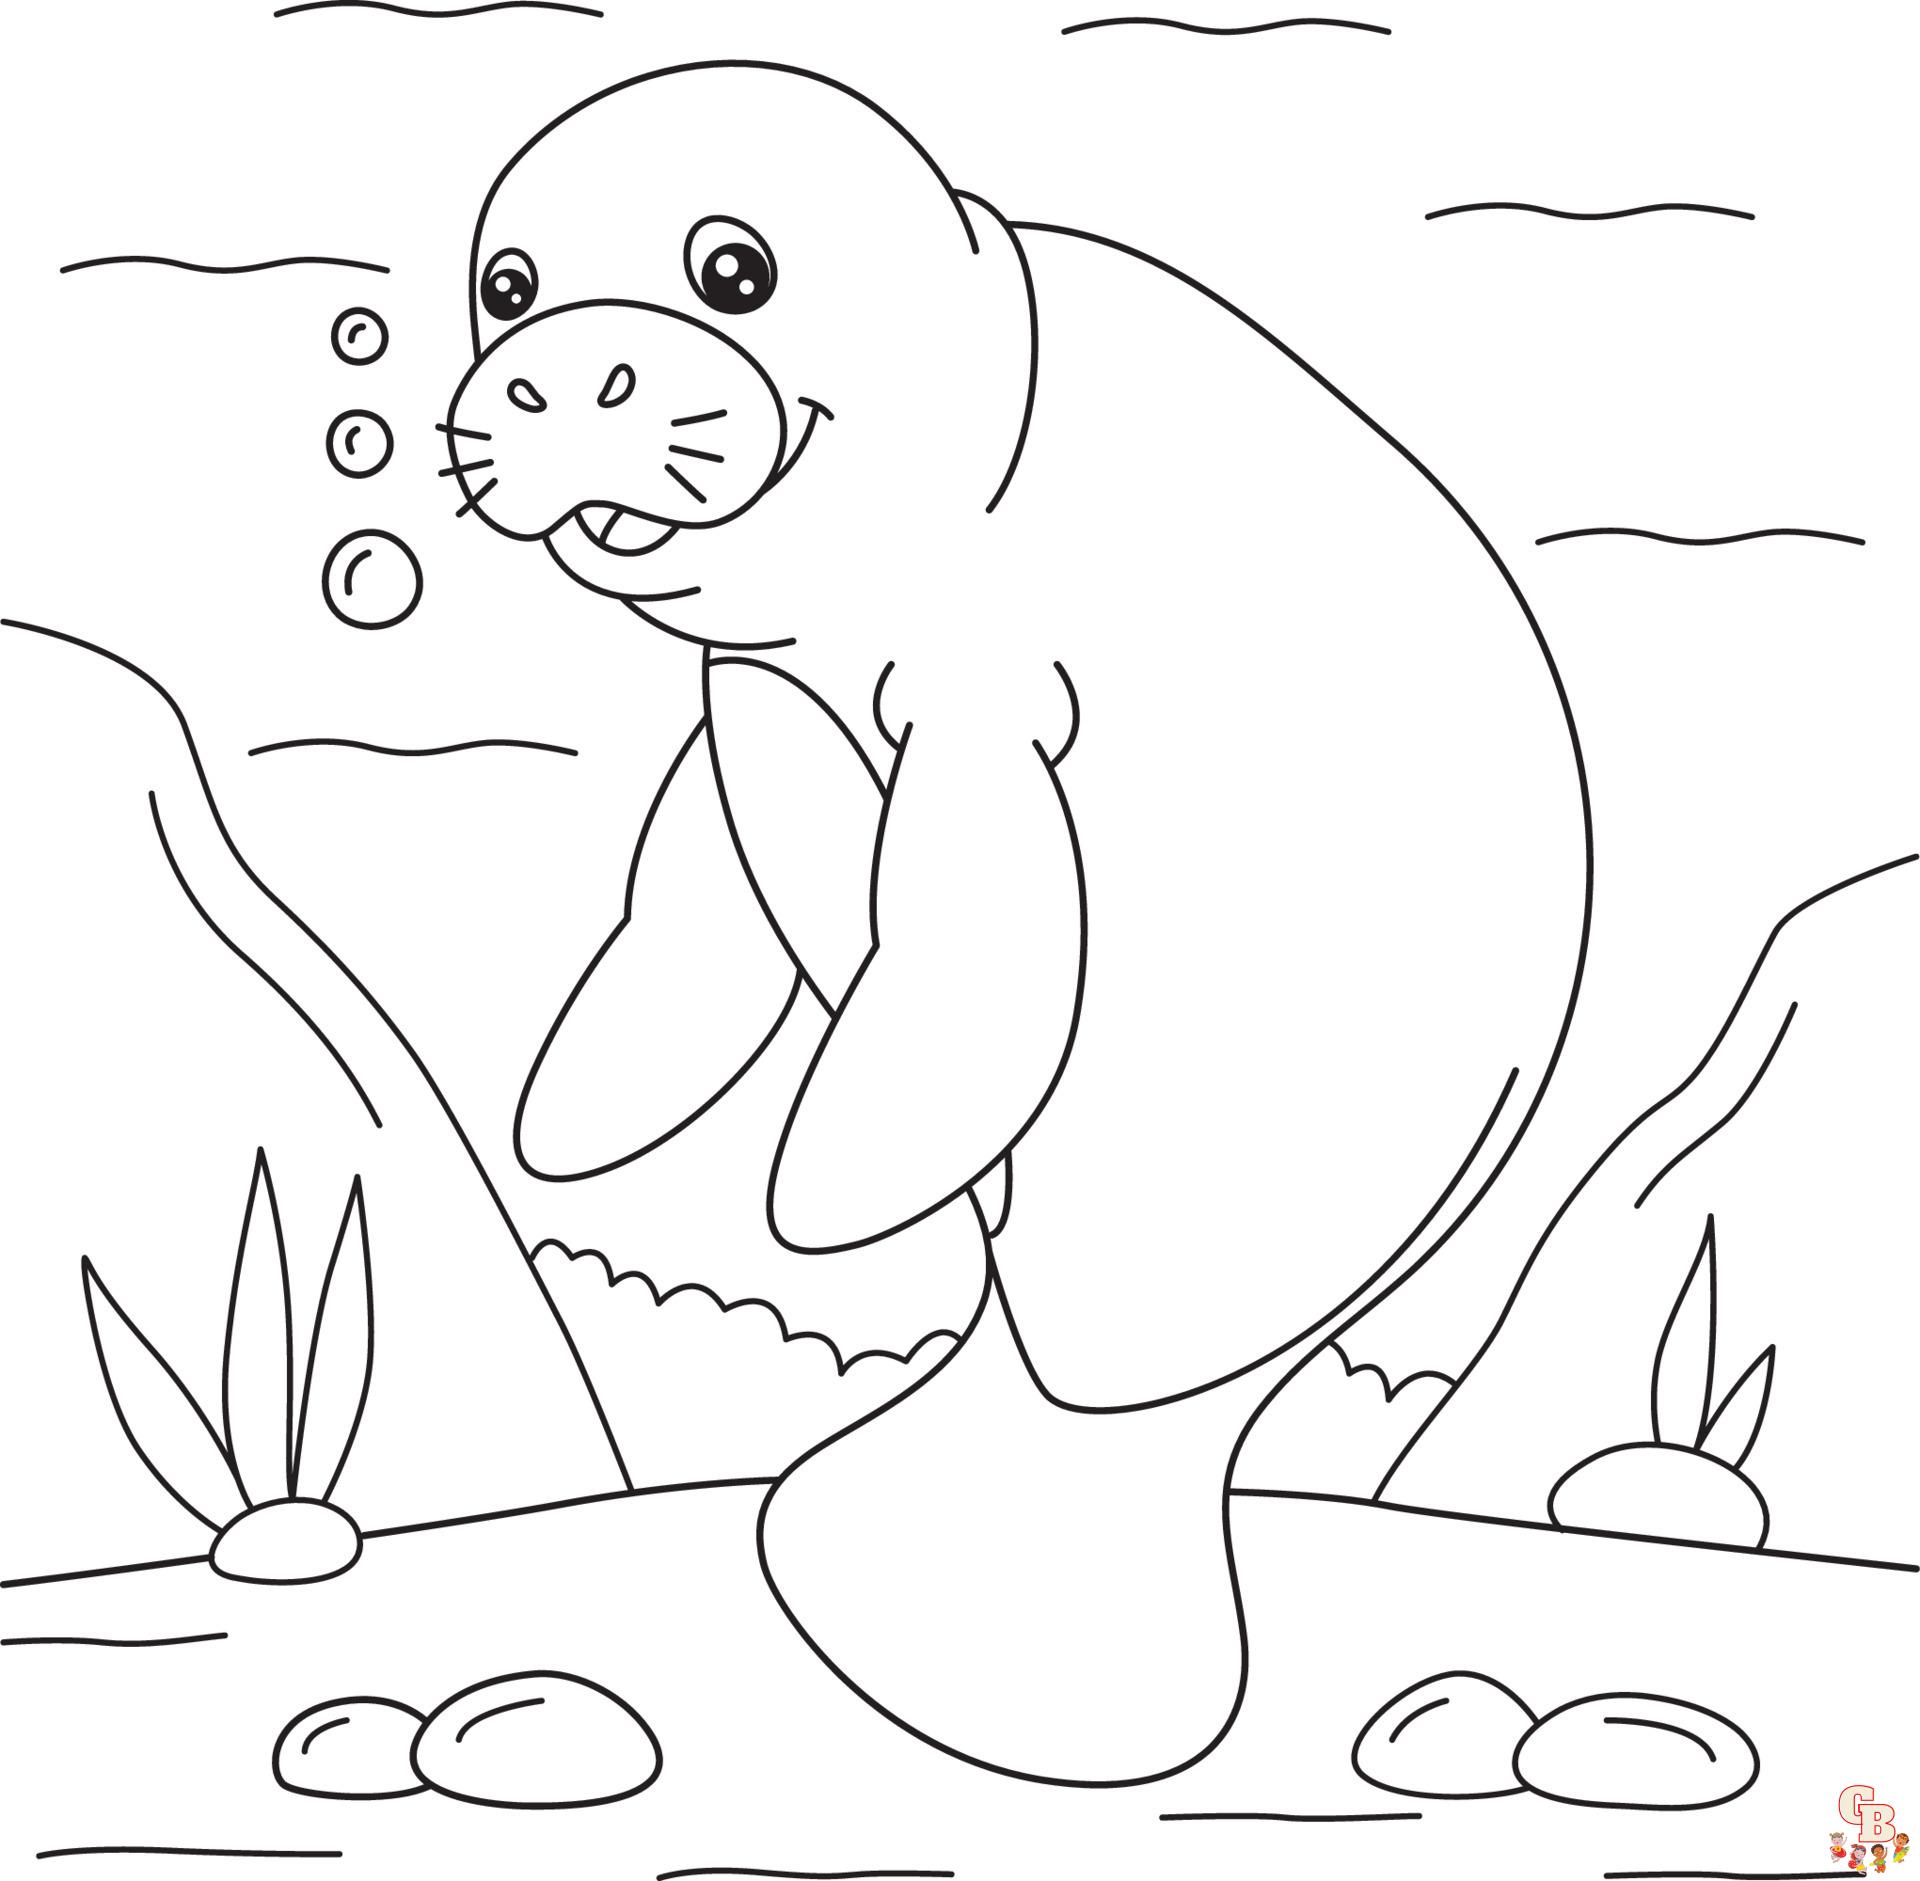 Manatee Coloring Pages 6